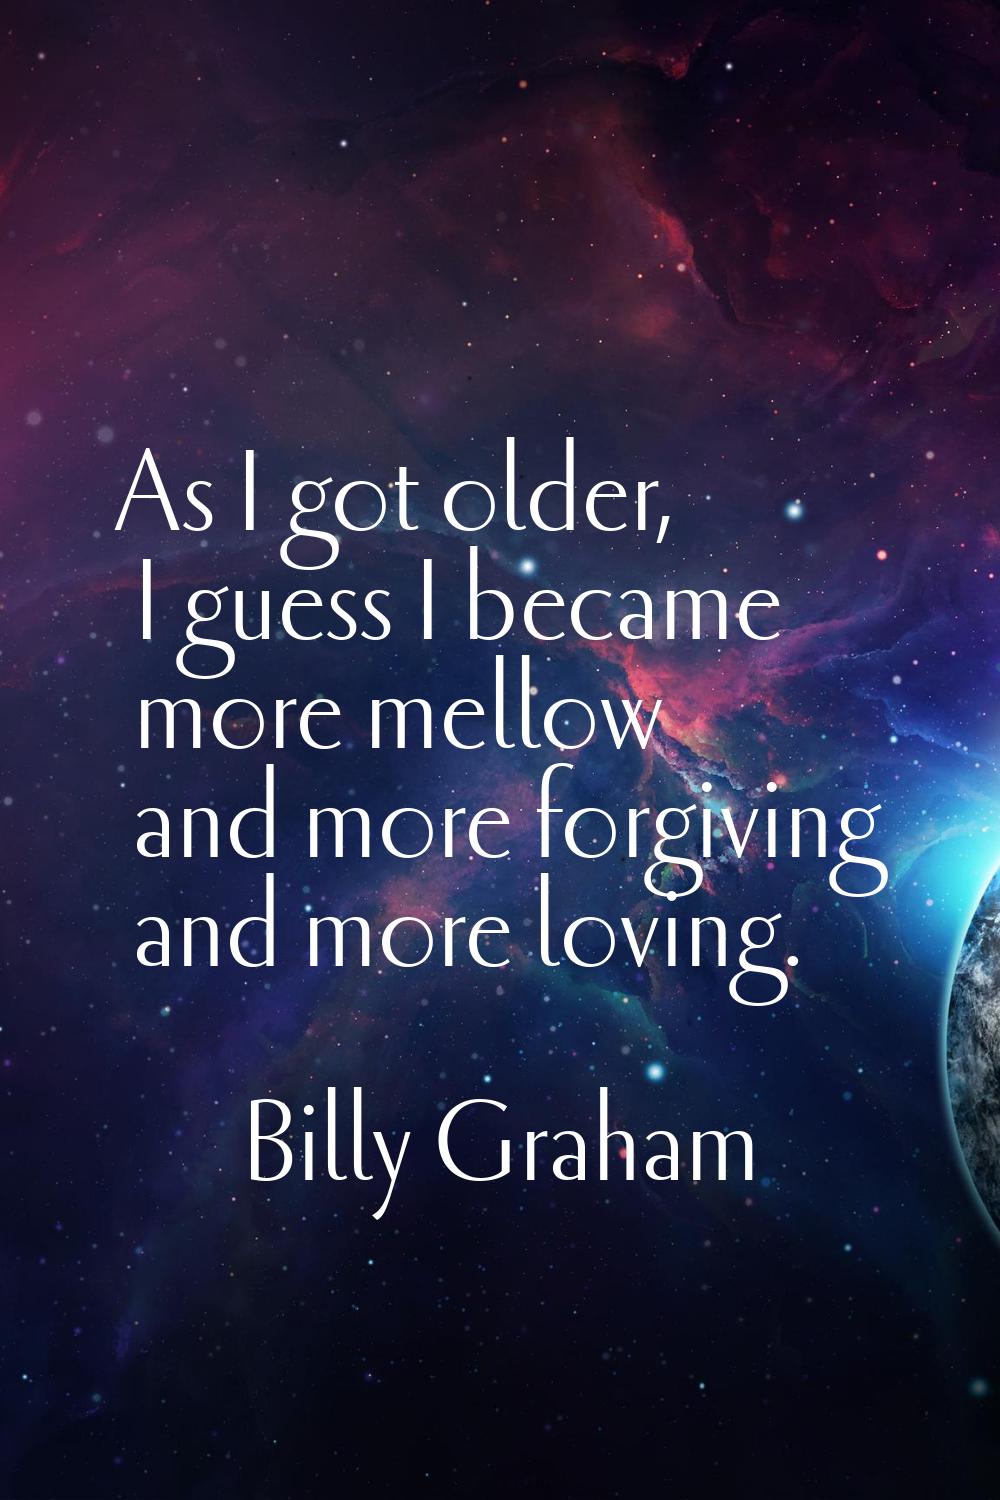 As I got older, I guess I became more mellow and more forgiving and more loving.